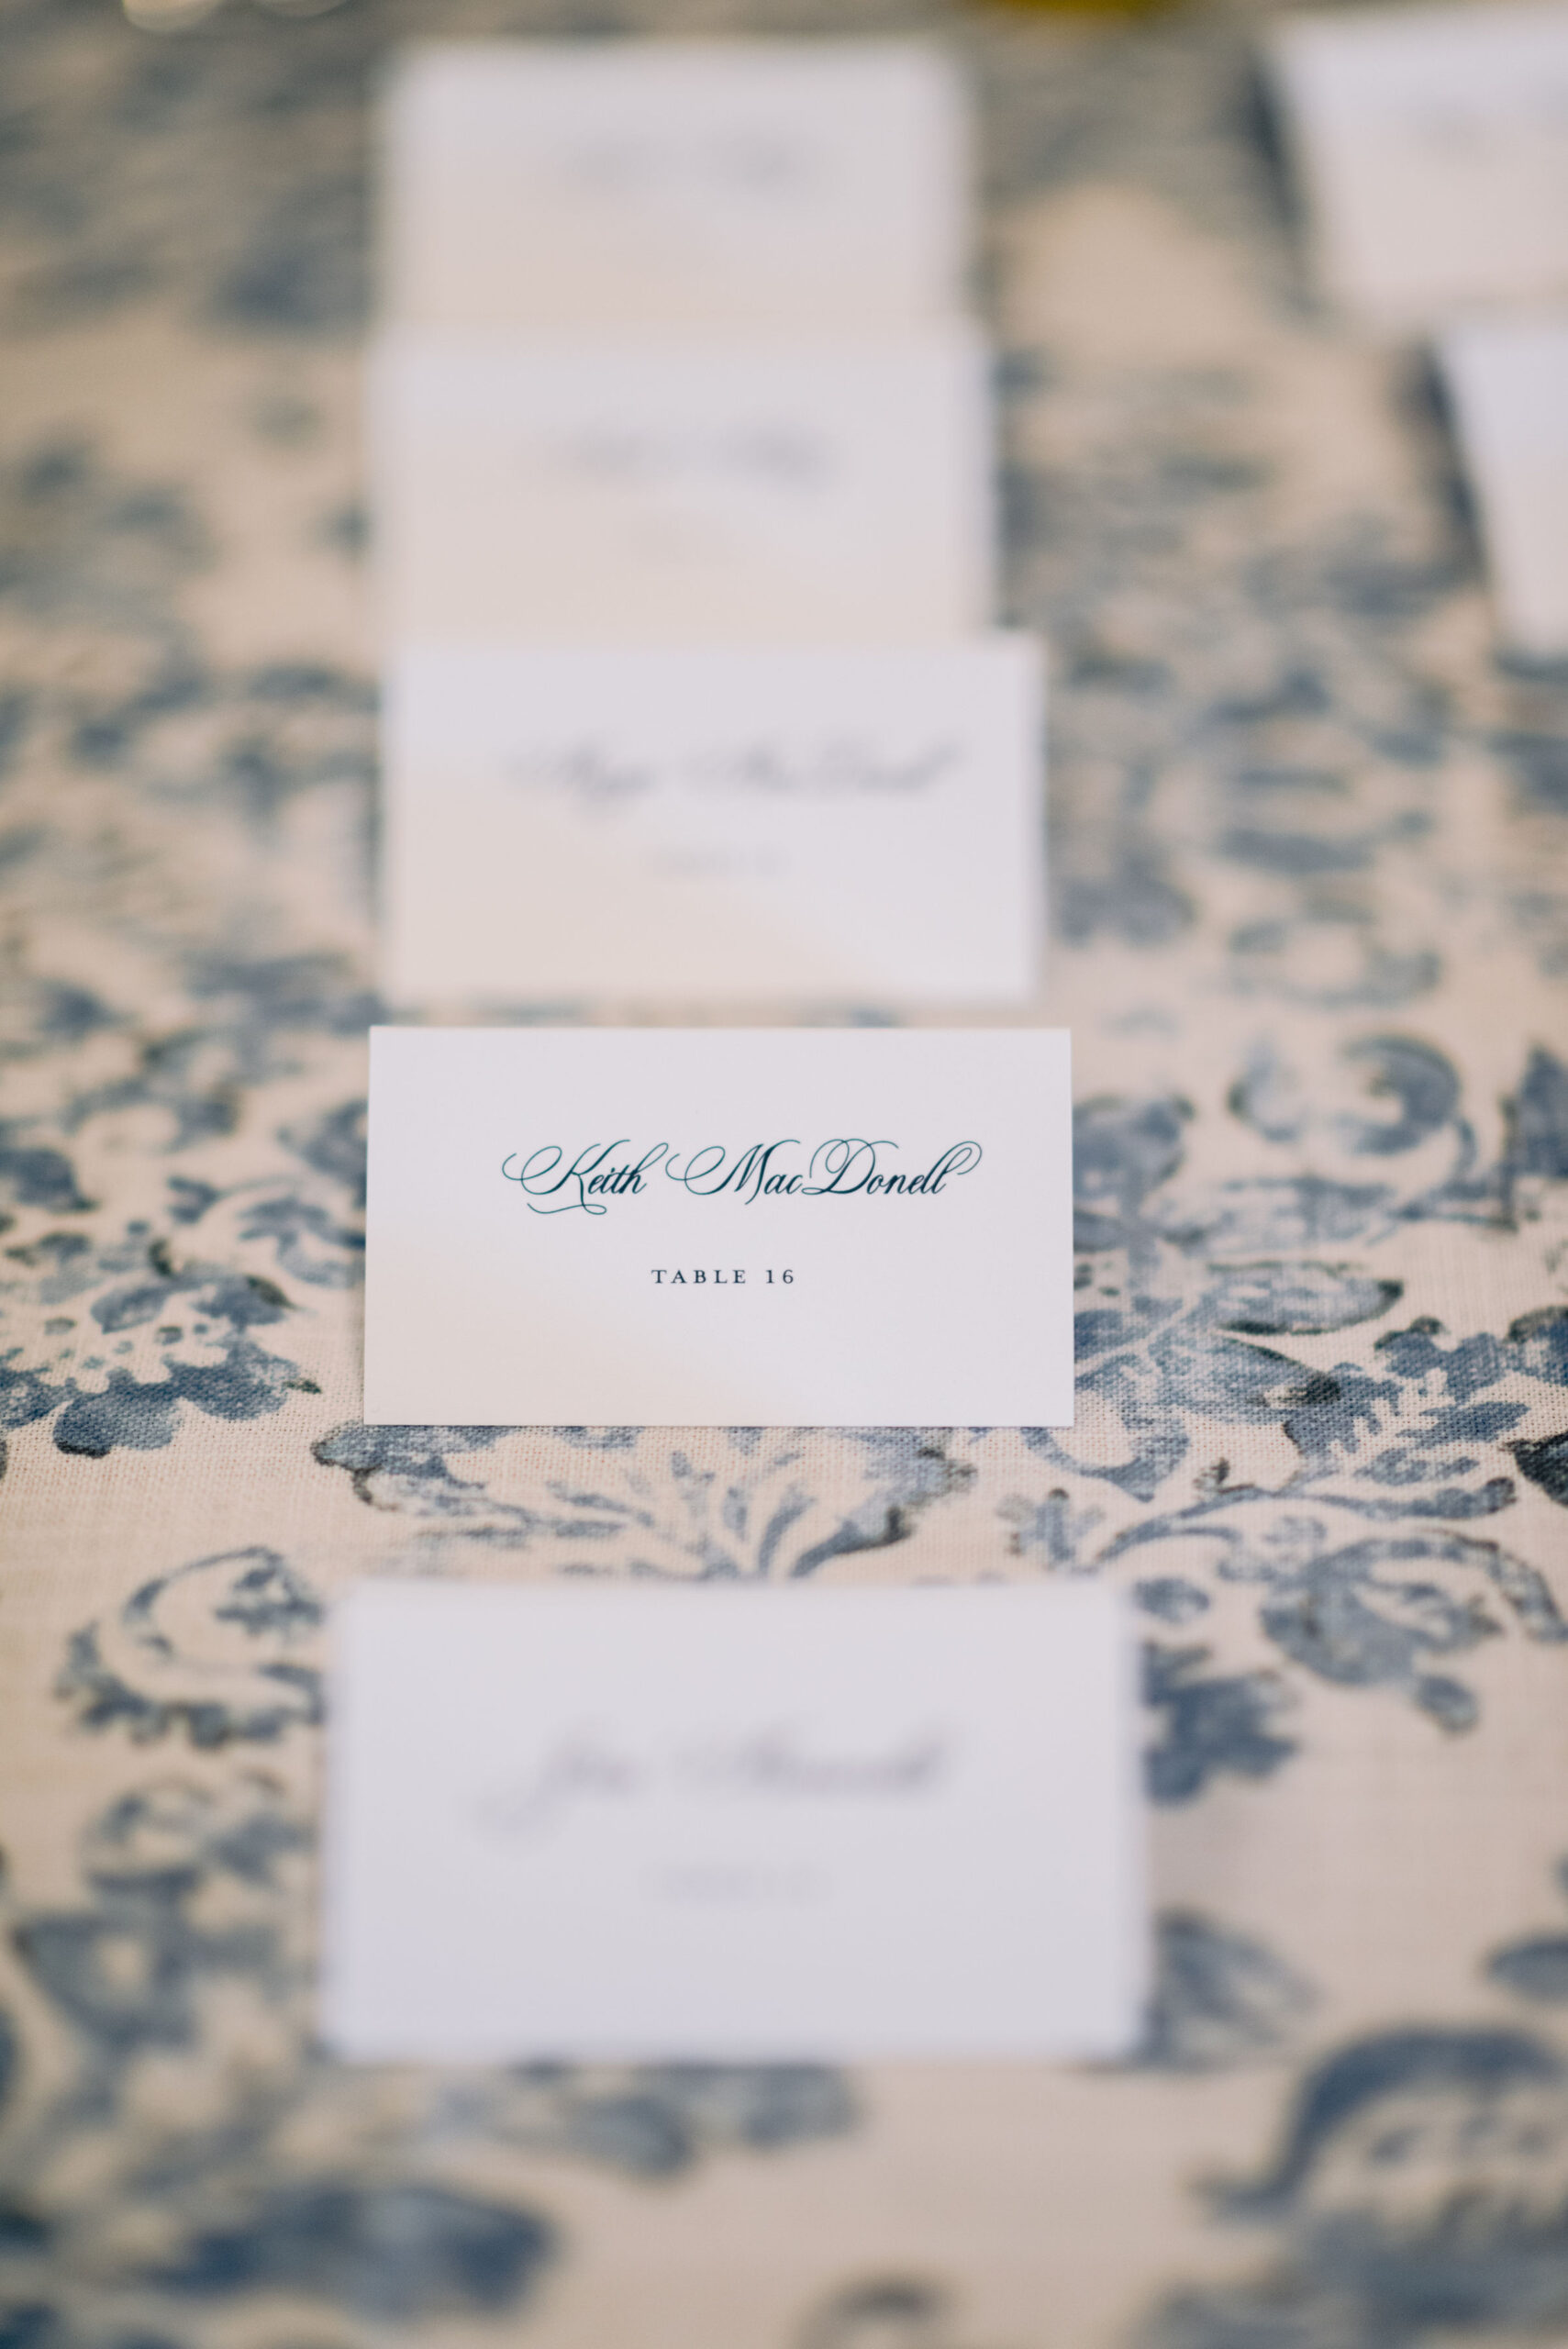 wedding place card; photo by Erika Aileen Photography